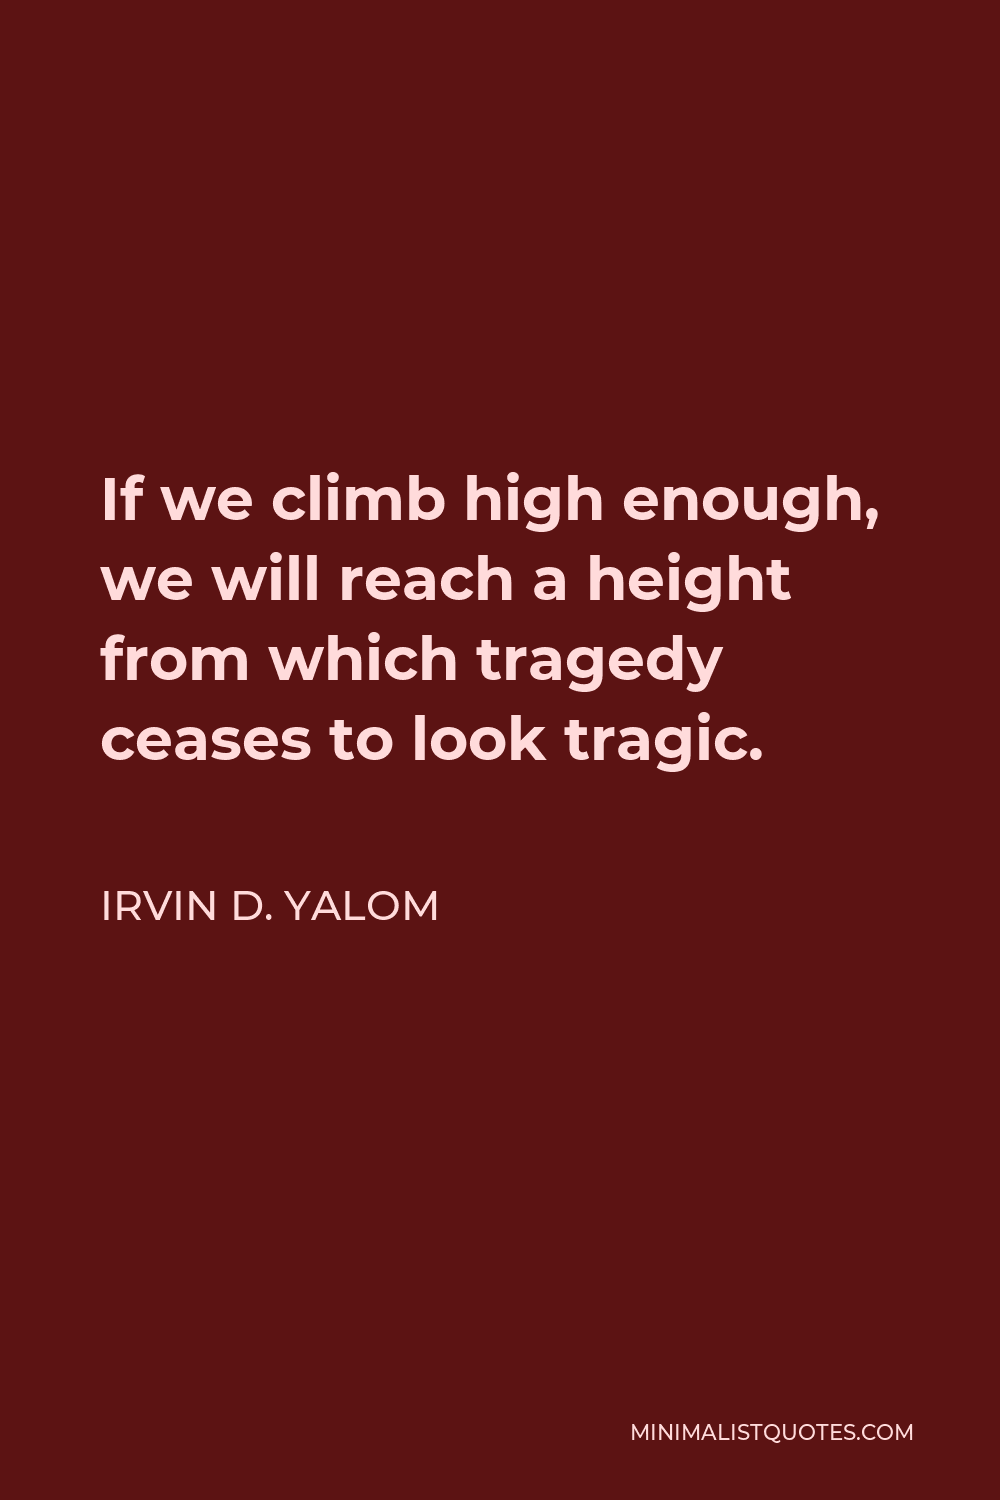 Irvin D. Yalom Quote - If we climb high enough, we will reach a height from which tragedy ceases to look tragic.